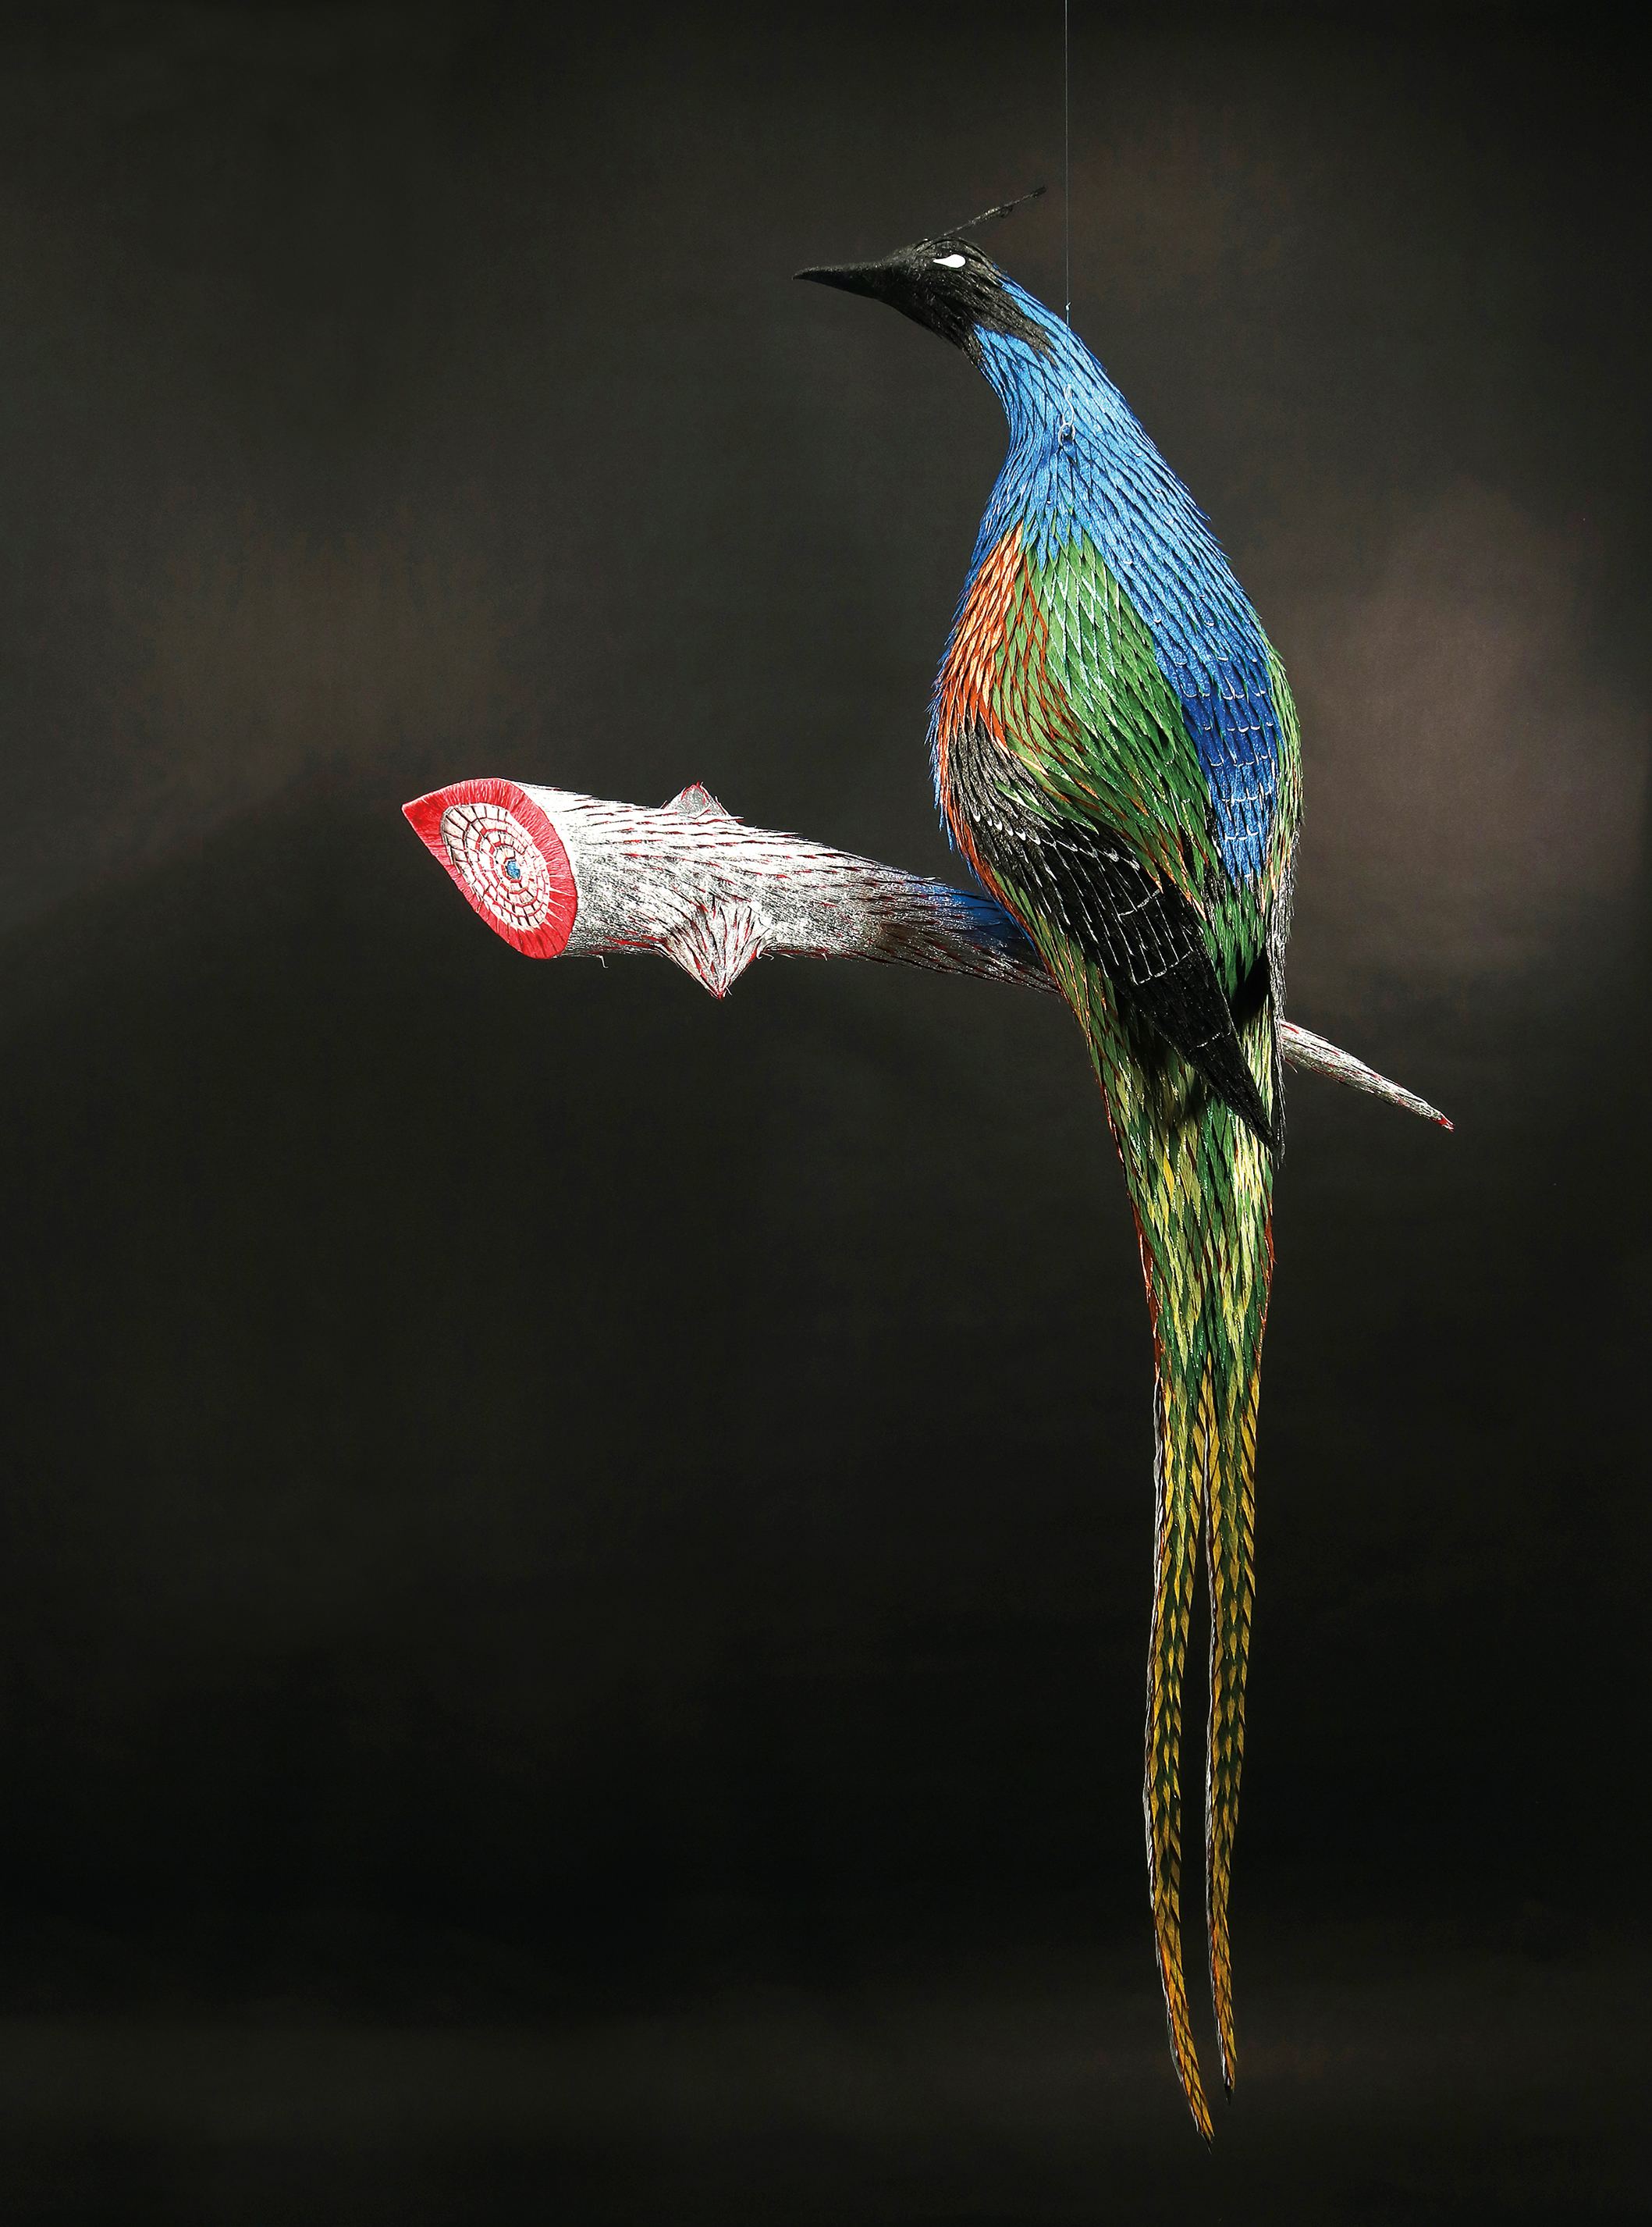 Bosch Bird No. 8, 2018, paper, glue, and wire, 54 x 29 x 16 in. Photo by Roberto Benavidez.